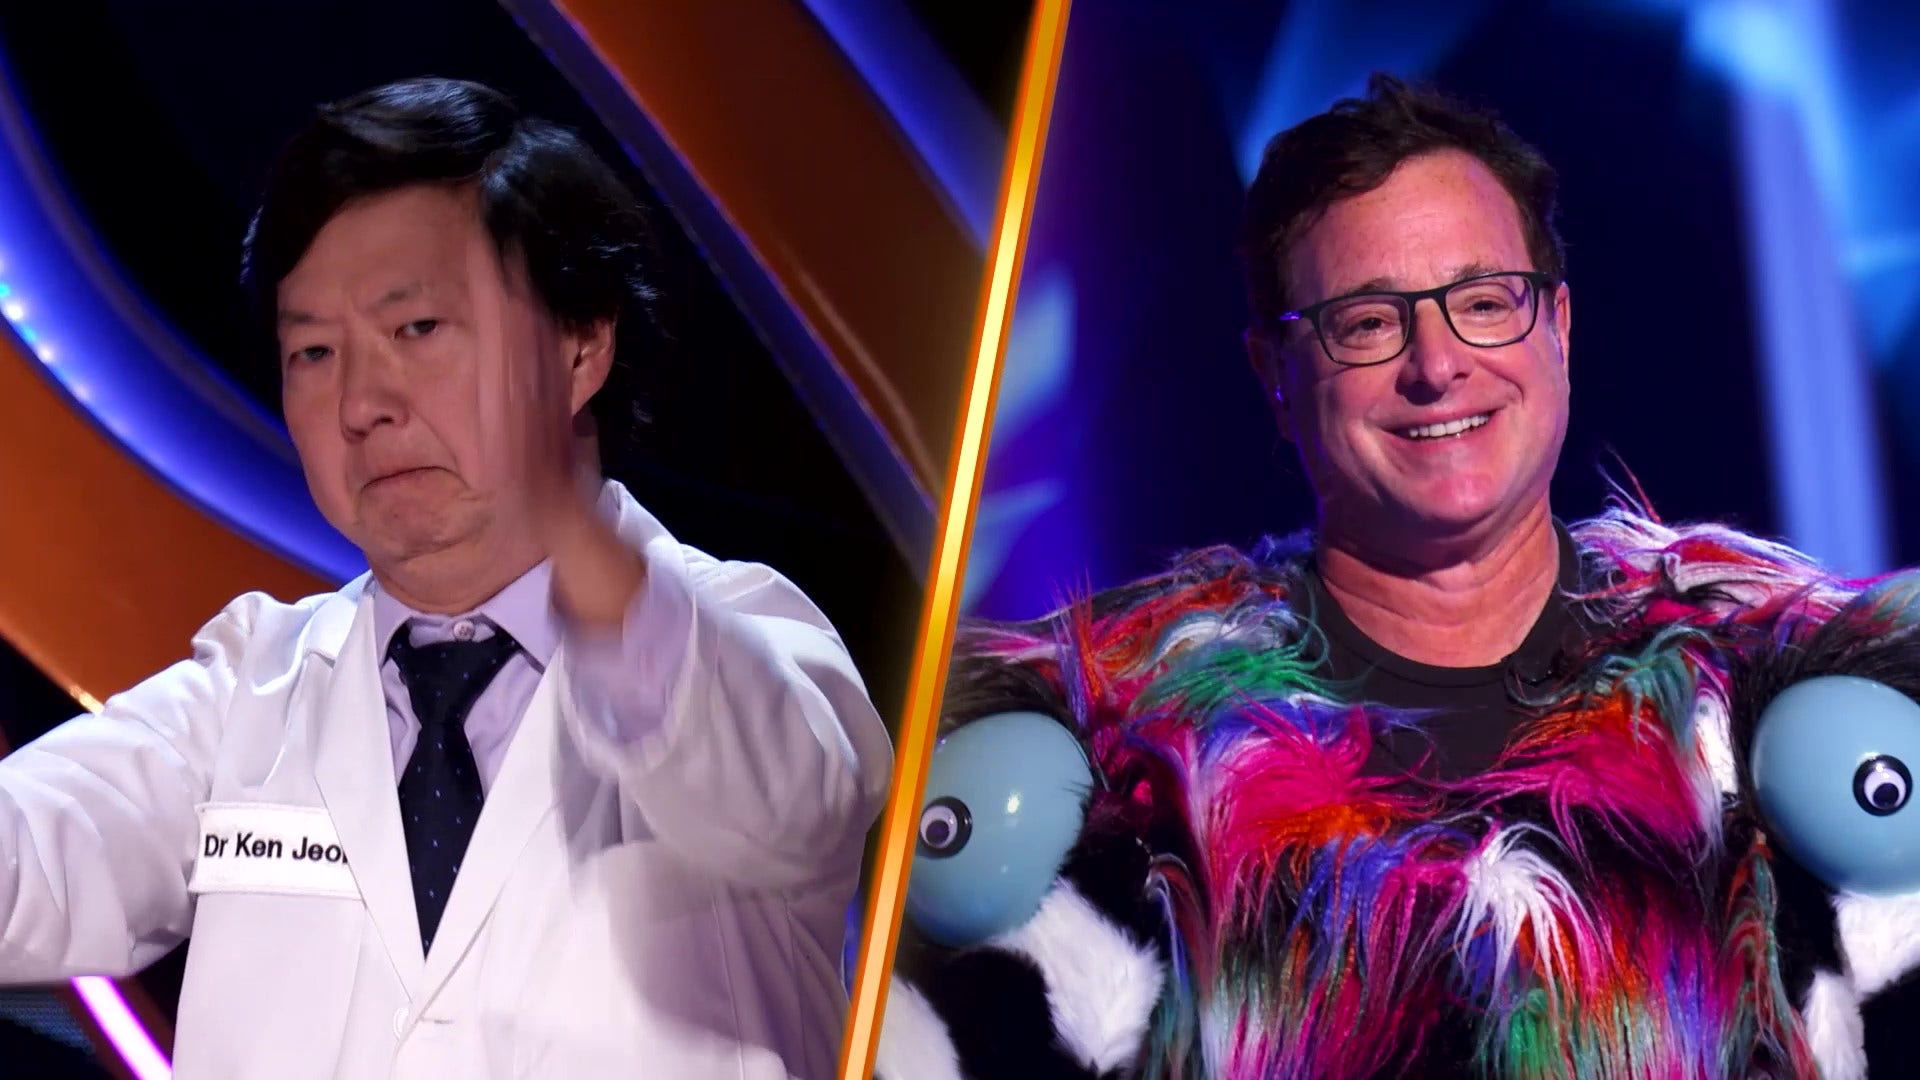 The Masked Singer S8 Fortune Teller & Harp Battle To "Everywhere You Look" 2022-10-04